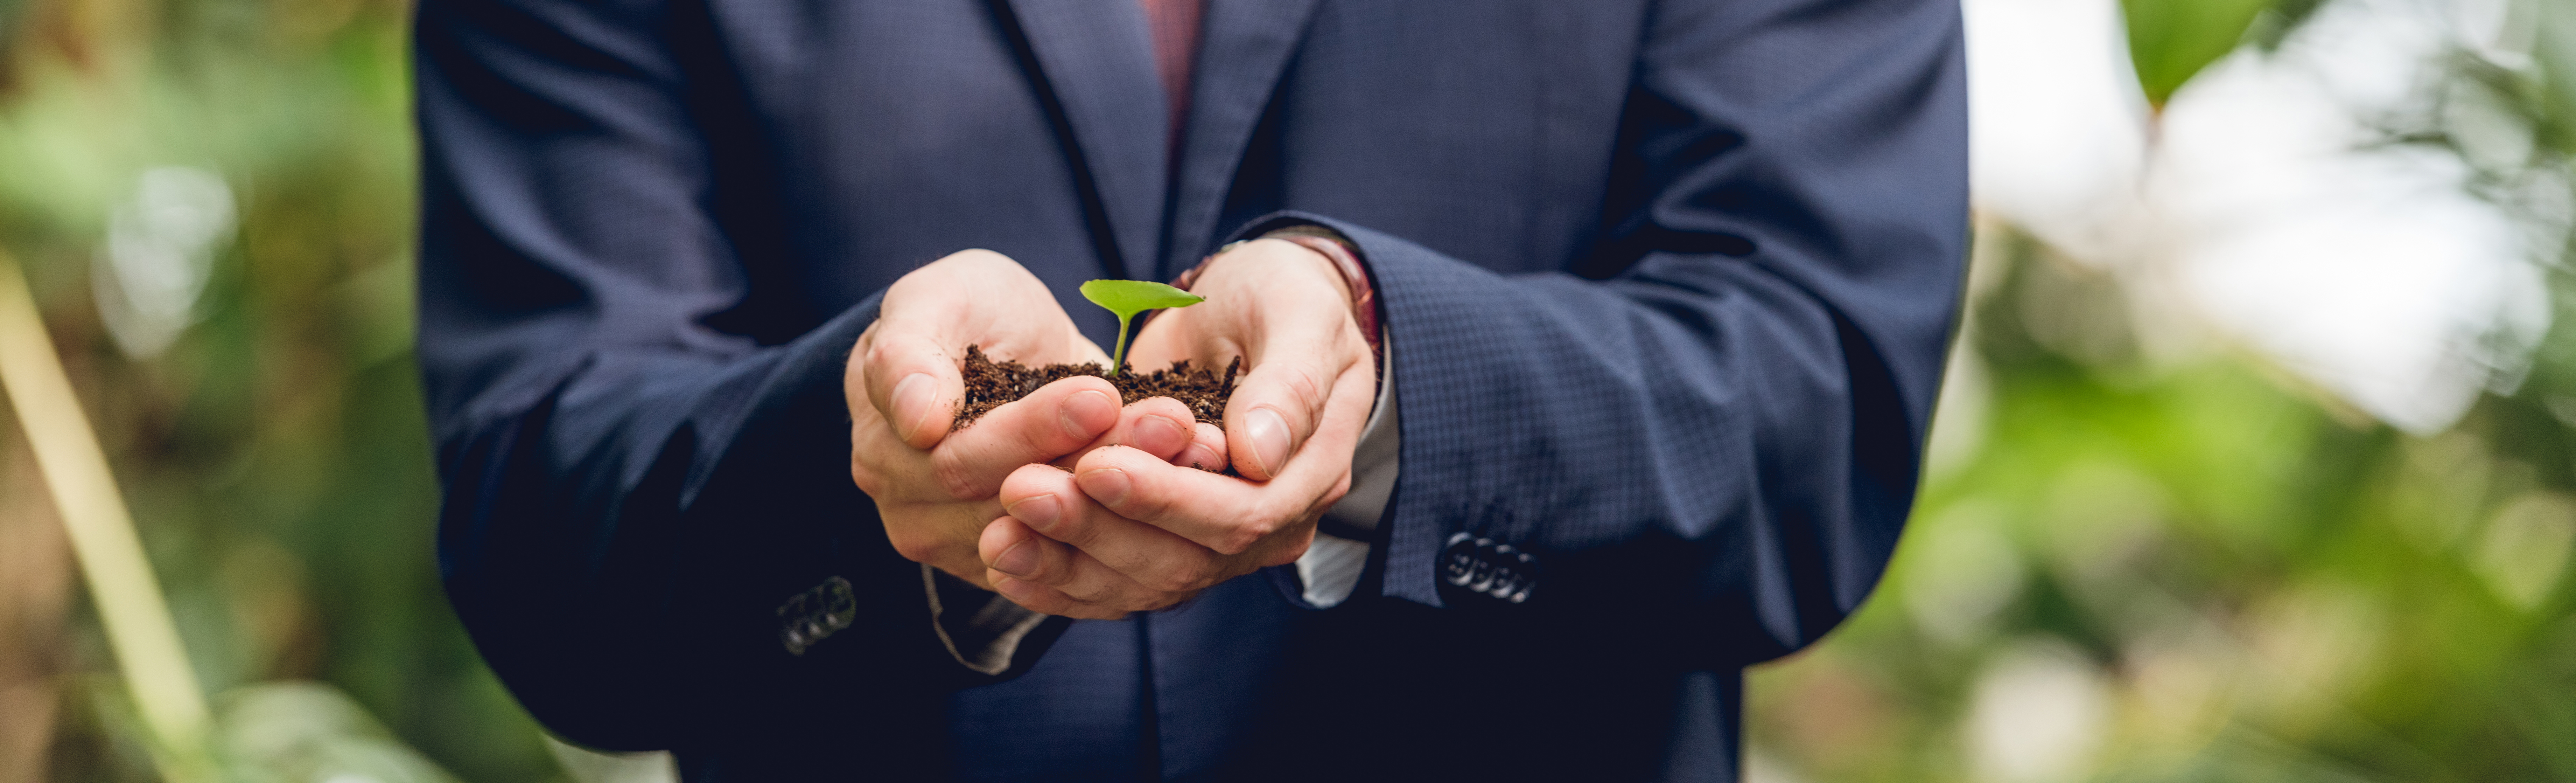 Businessman holding tiny plant in soil in his hands.